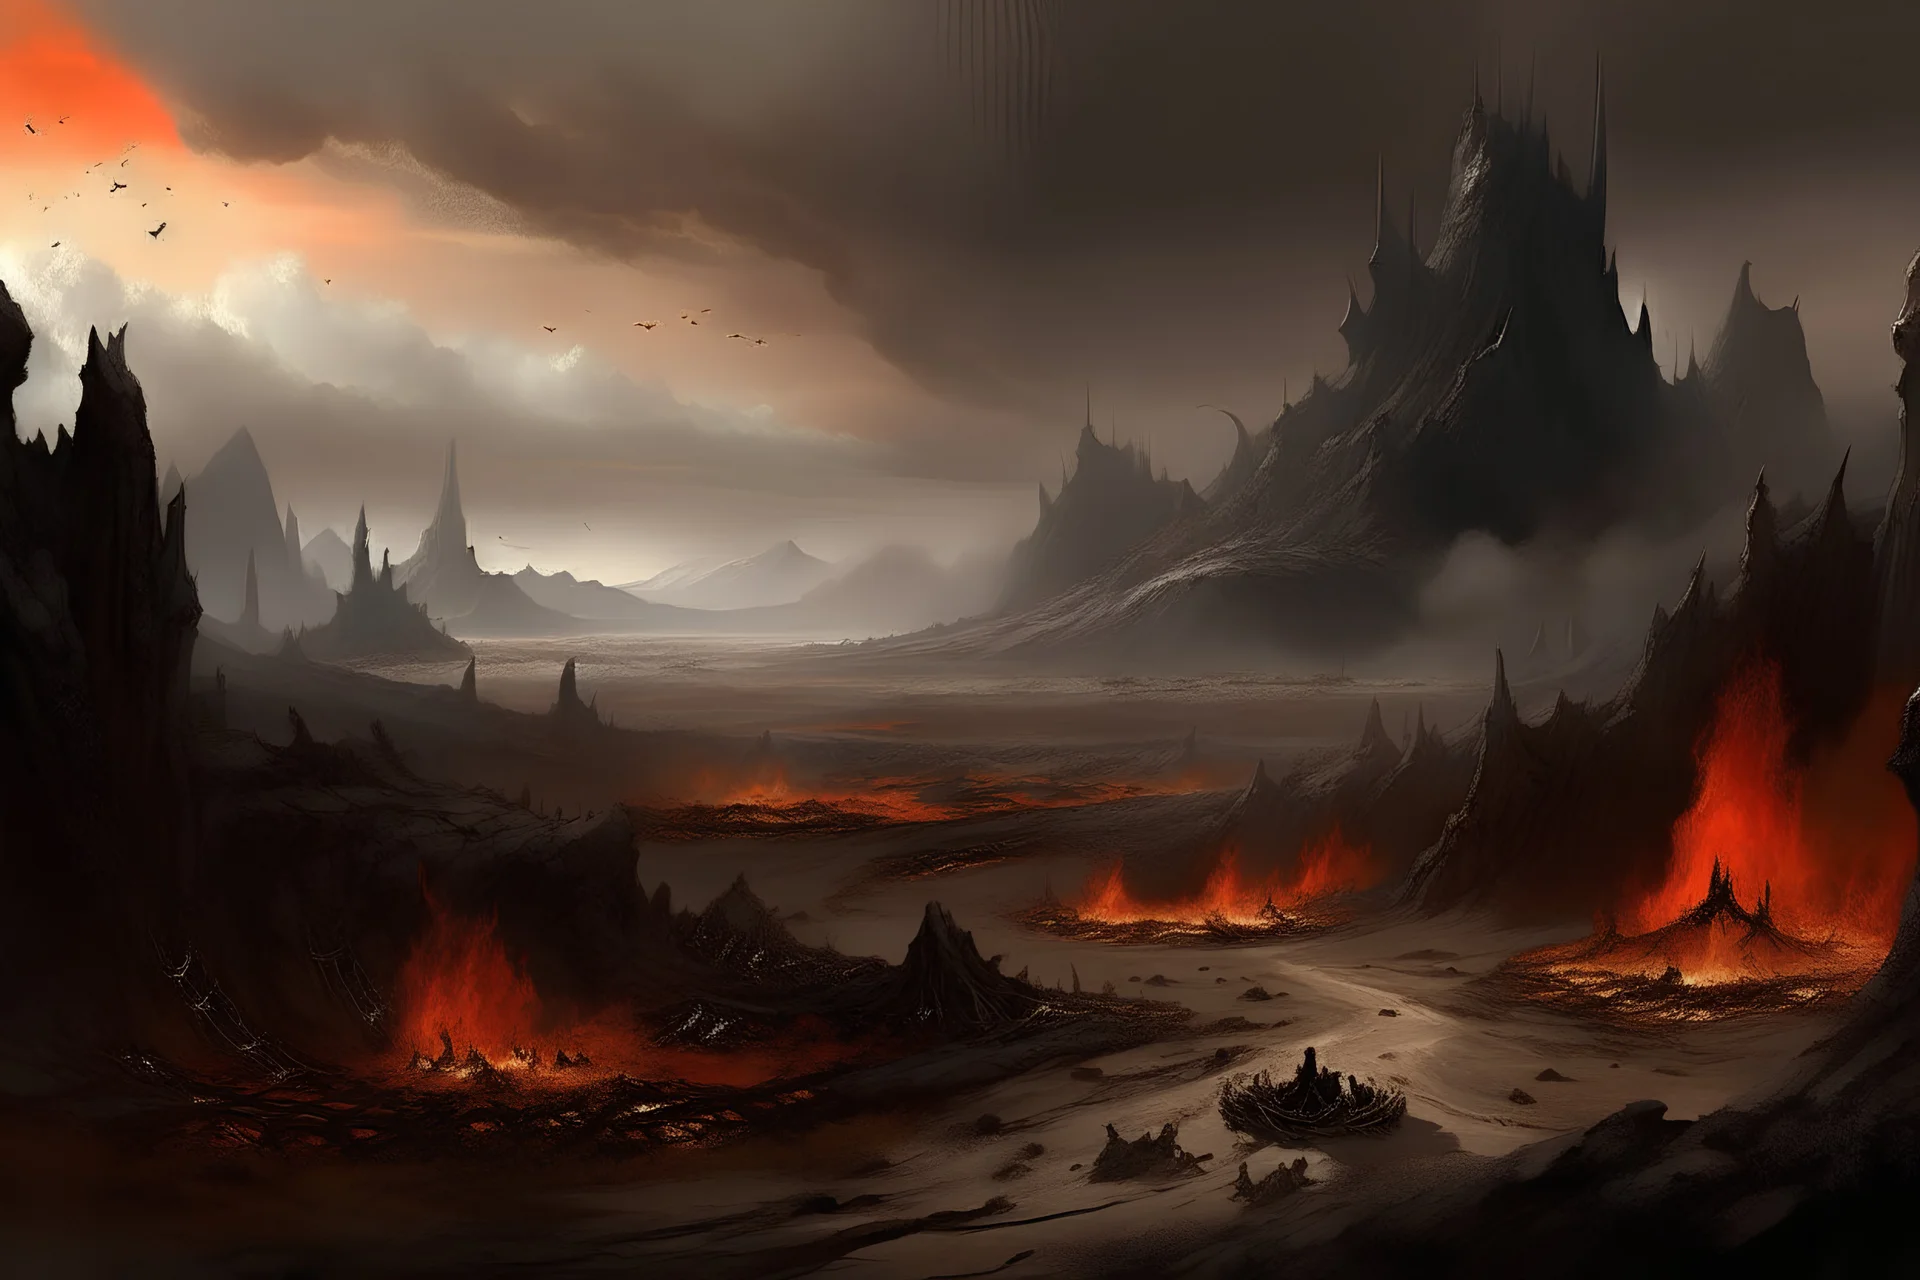 a realistic depiction of an ominous landscape of desolation and torment. Charred plains stretch endlessly, with jagged cliffs and rivers of molten lava carving through the barren terrain. The air is thick with acrid smoke, choking those unfortunate souls consigned to this infernal abyss. Demonic creatures prowl the scorched landscape, their twisted forms embodying cruelty and malice. Sinister fortresses loom in the distance